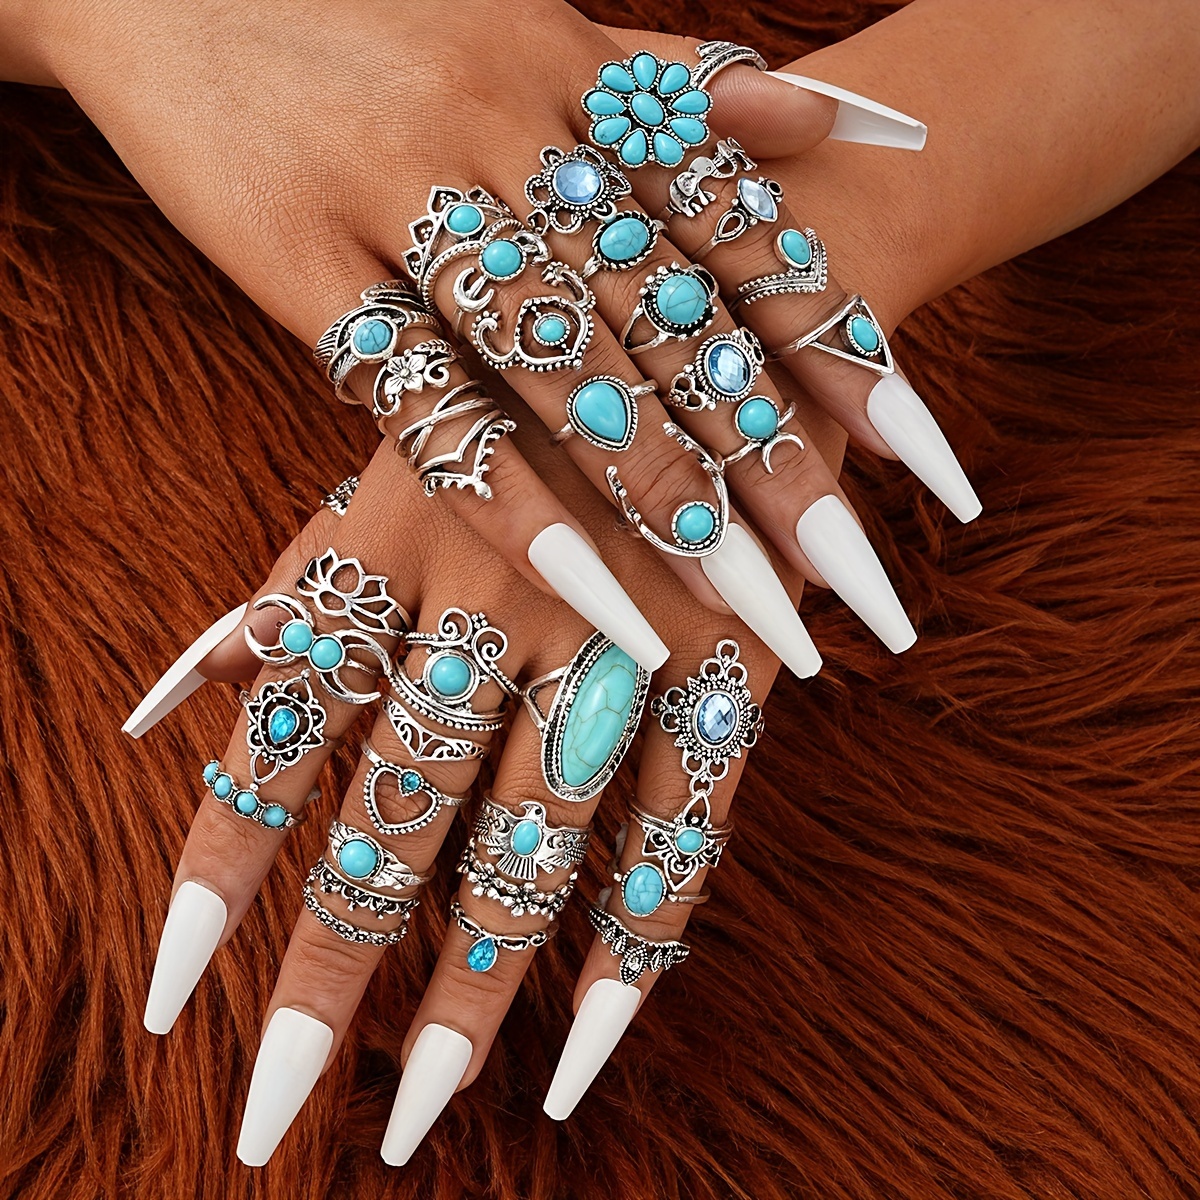 

44-piece Vintage & Cute Turquoise Rhinestone Ring Set - Adjustable Open Rings With Floral, Bird, Crown Designs For Women - Perfect For Daily Wear, Parties, And Gifts (no Box Included)